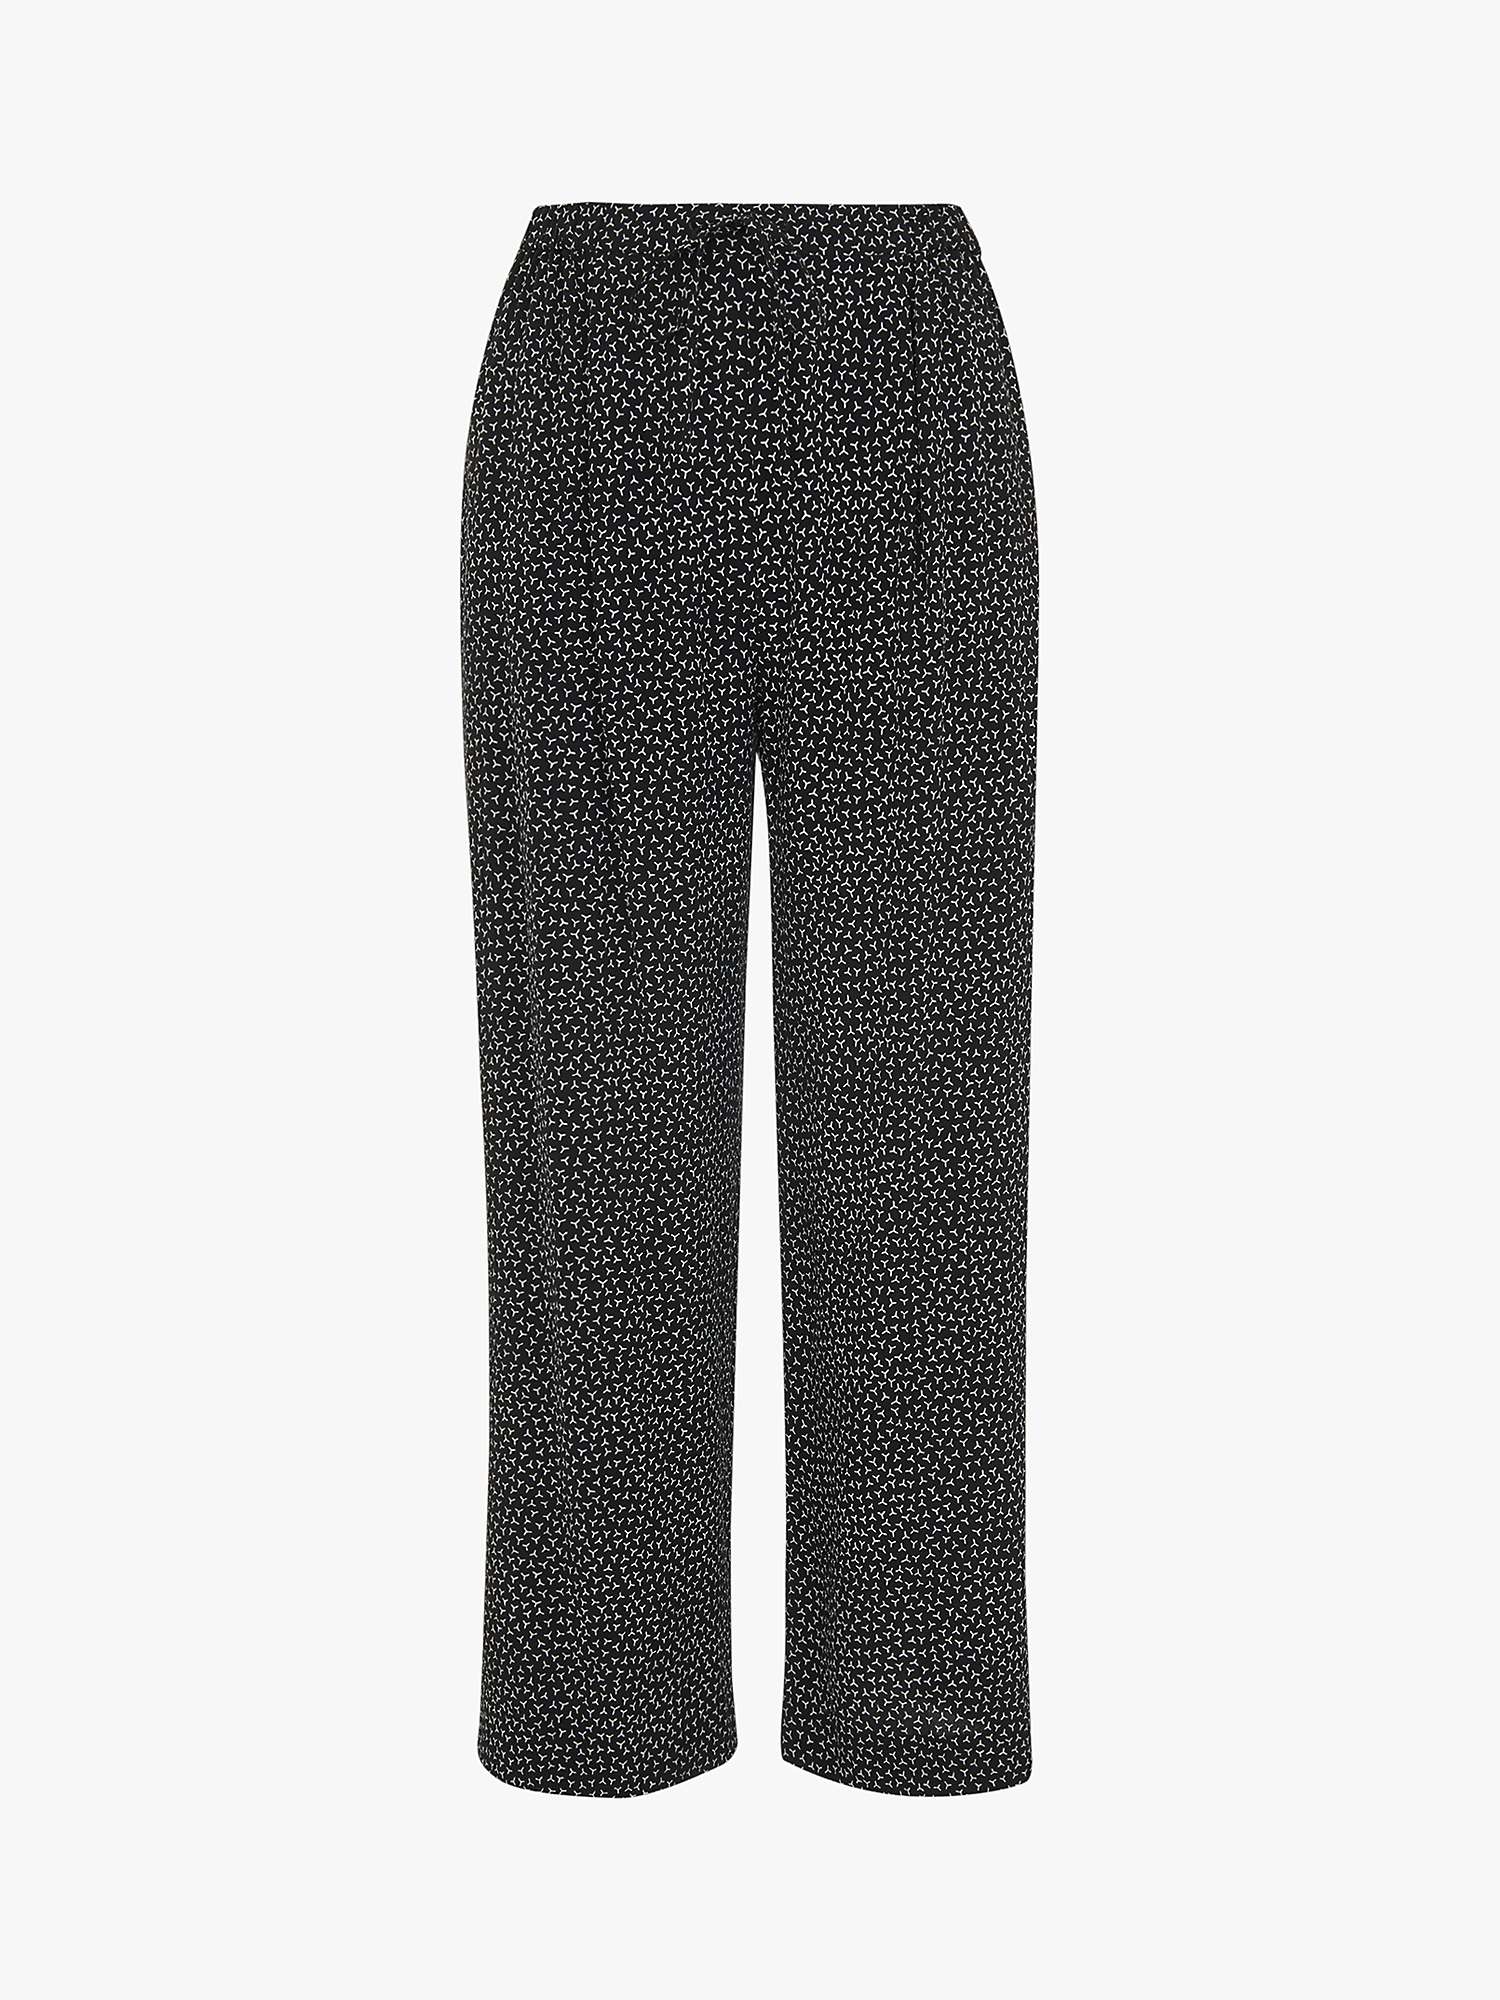 Buy Whistles Scattered Y Print Trousers, Black/White Online at johnlewis.com